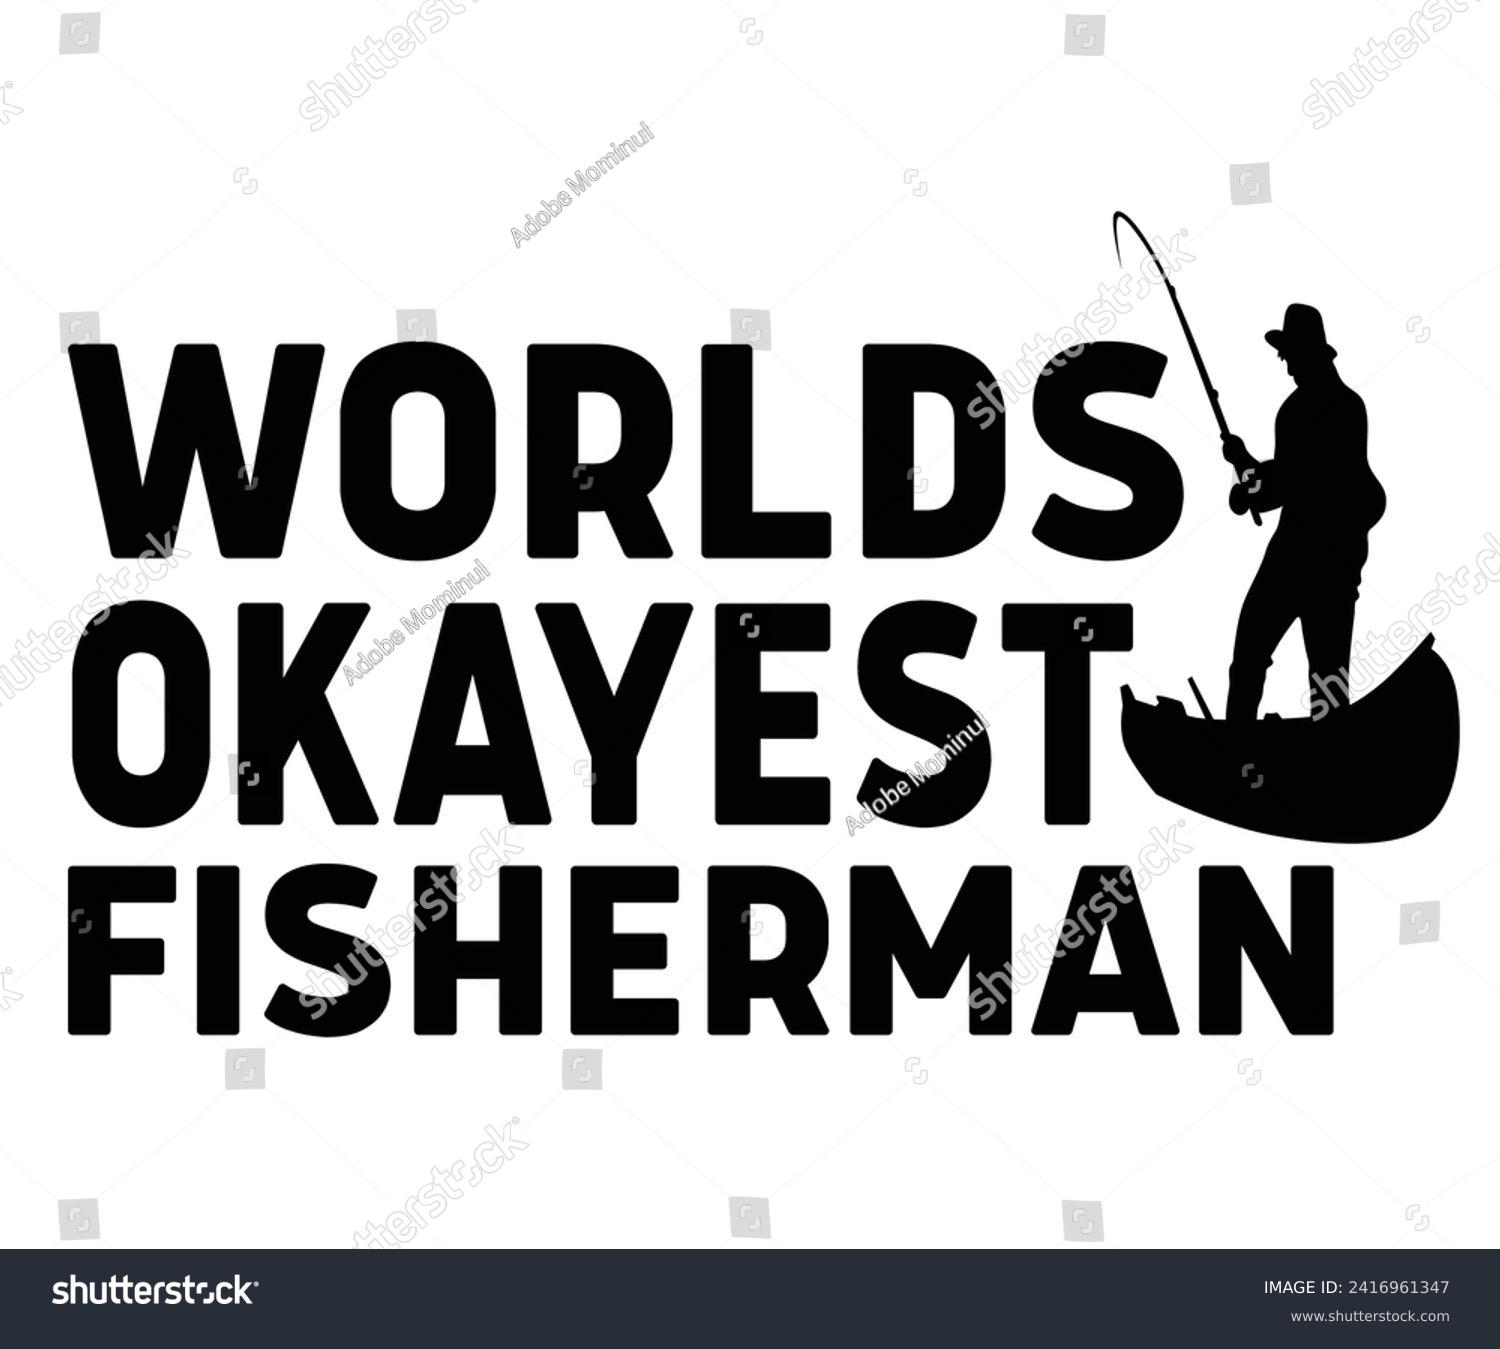 SVG of Worlds Okayest Fisherman Svg,Father's Day Svg,Papa svg,Grandpa Svg,Father's Day Saying Qoutes,Dad Svg,Funny Father, Gift For Dad Svg,Daddy Svg,Family Svg,T shirt Design,Svg Cut File,Typography svg